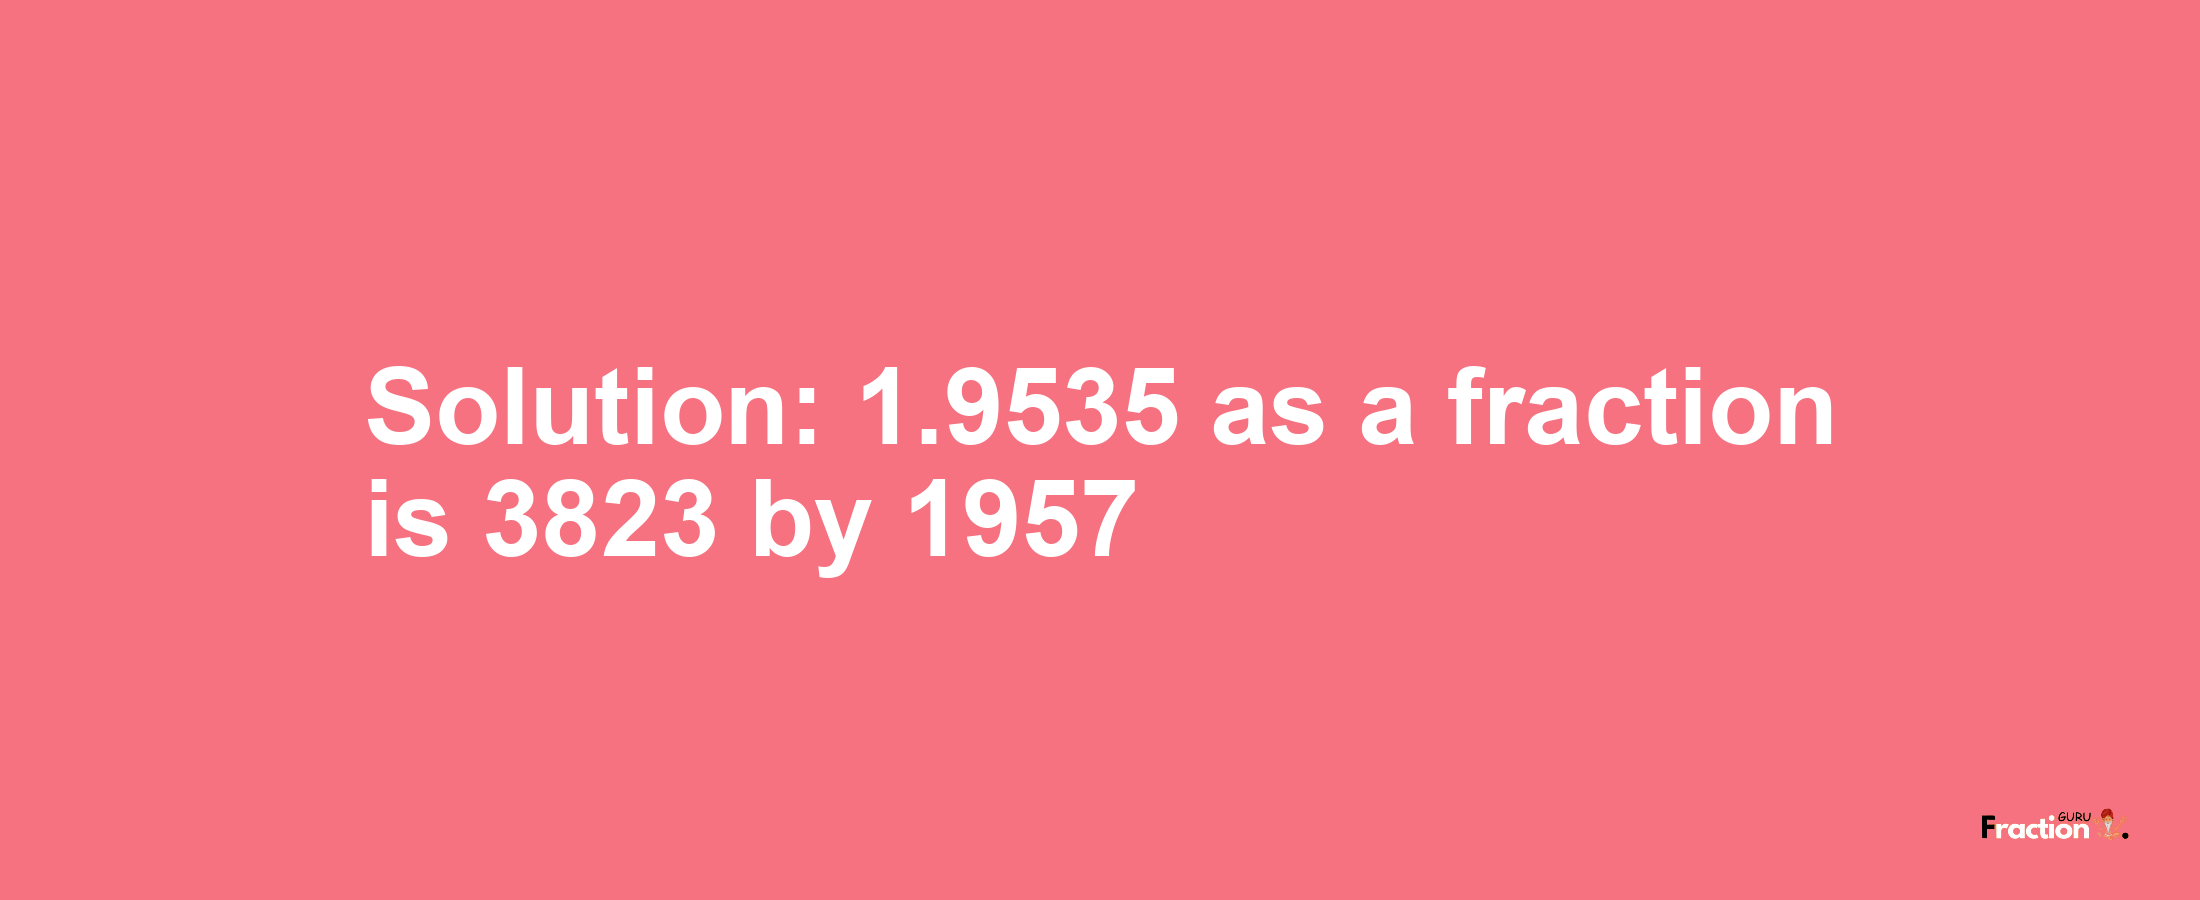 Solution:1.9535 as a fraction is 3823/1957